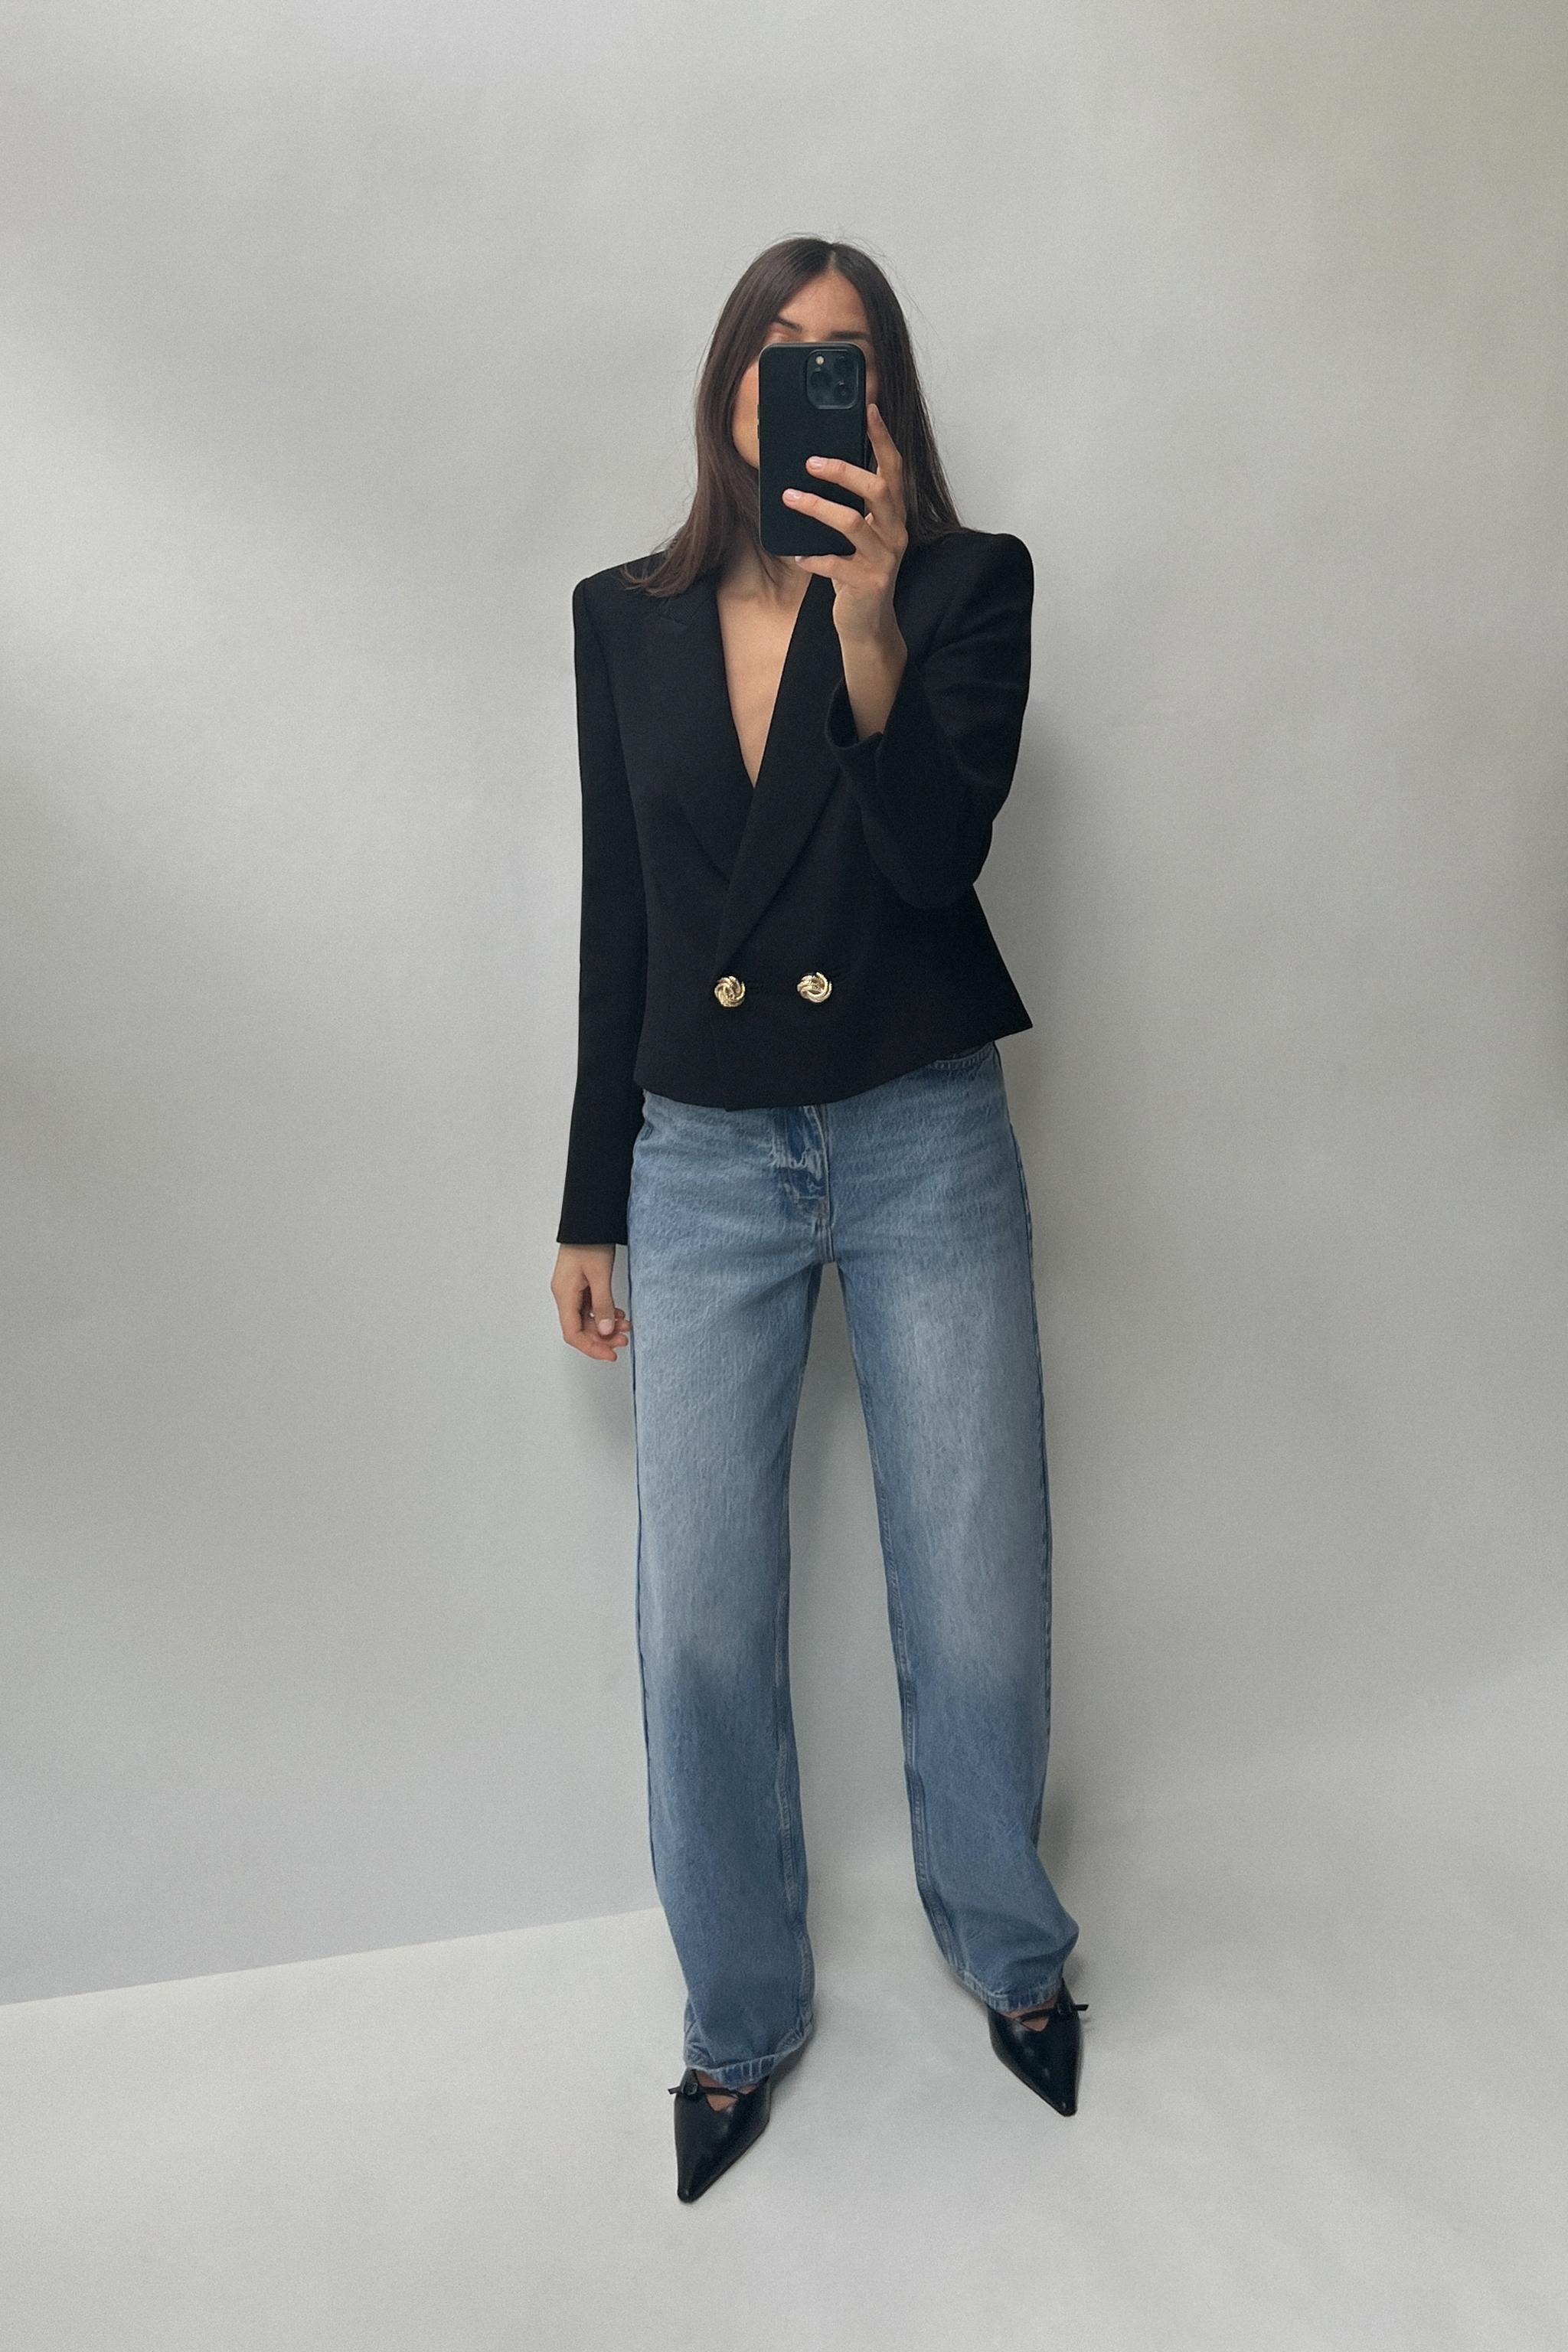 Zara brown blazer with black bodysuit and blue jeans Outfit